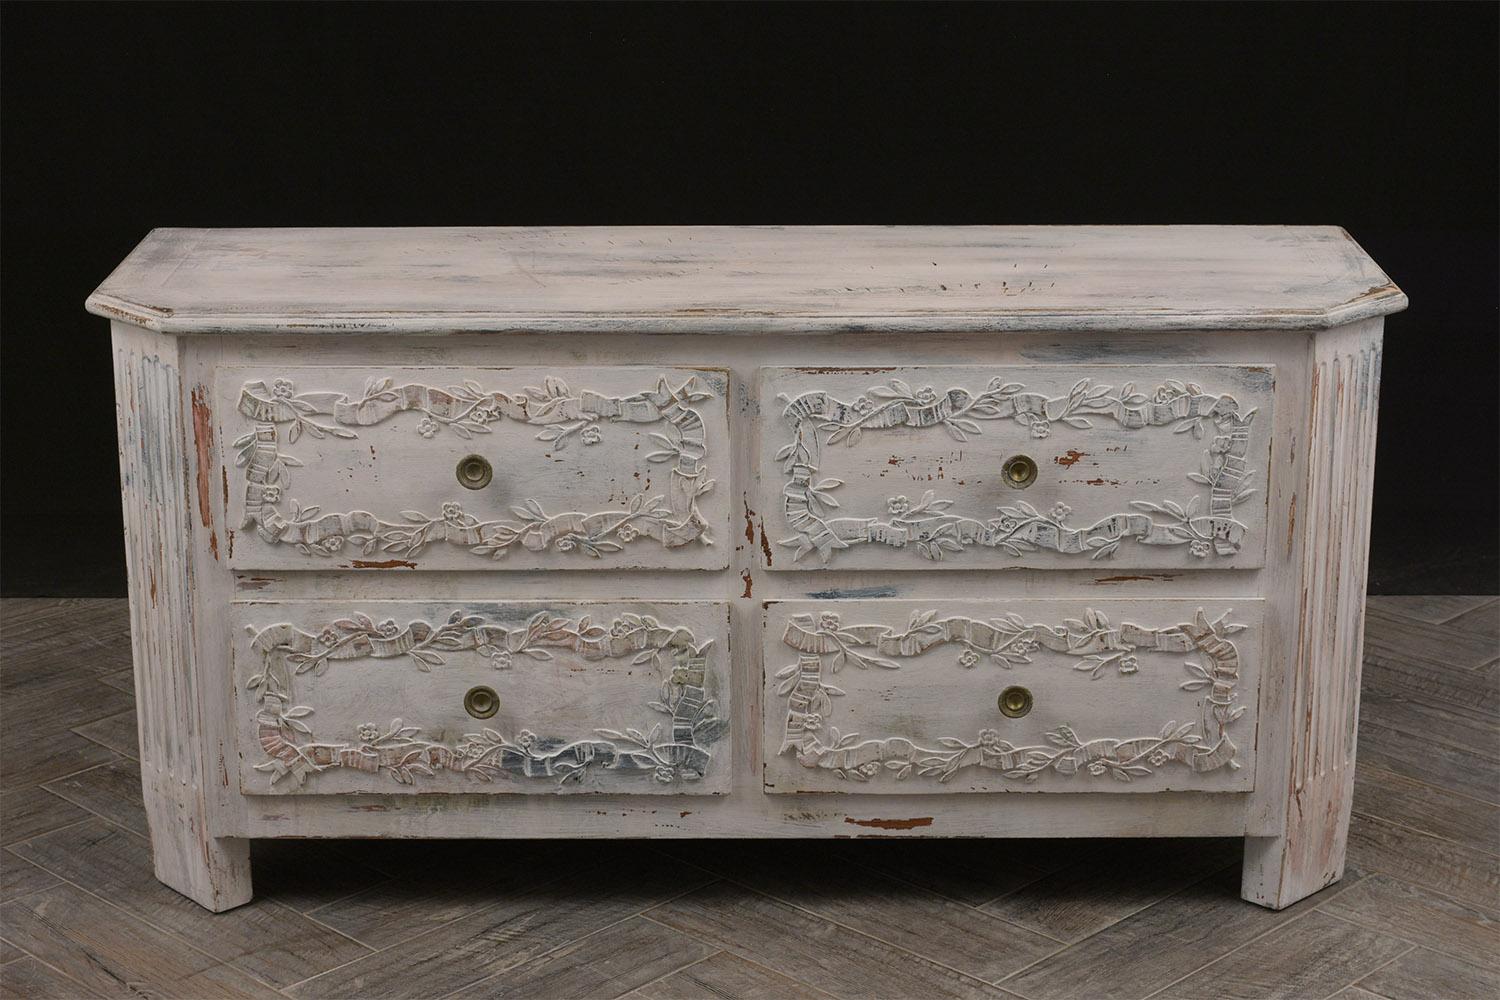 This 1920s Italian chest of drawers is one of a kind, the beveled wooden top and wooden frame have recently been painted in an oyster and red color combination with a beautiful distressed finish. On the facades of the four drawers there are floral